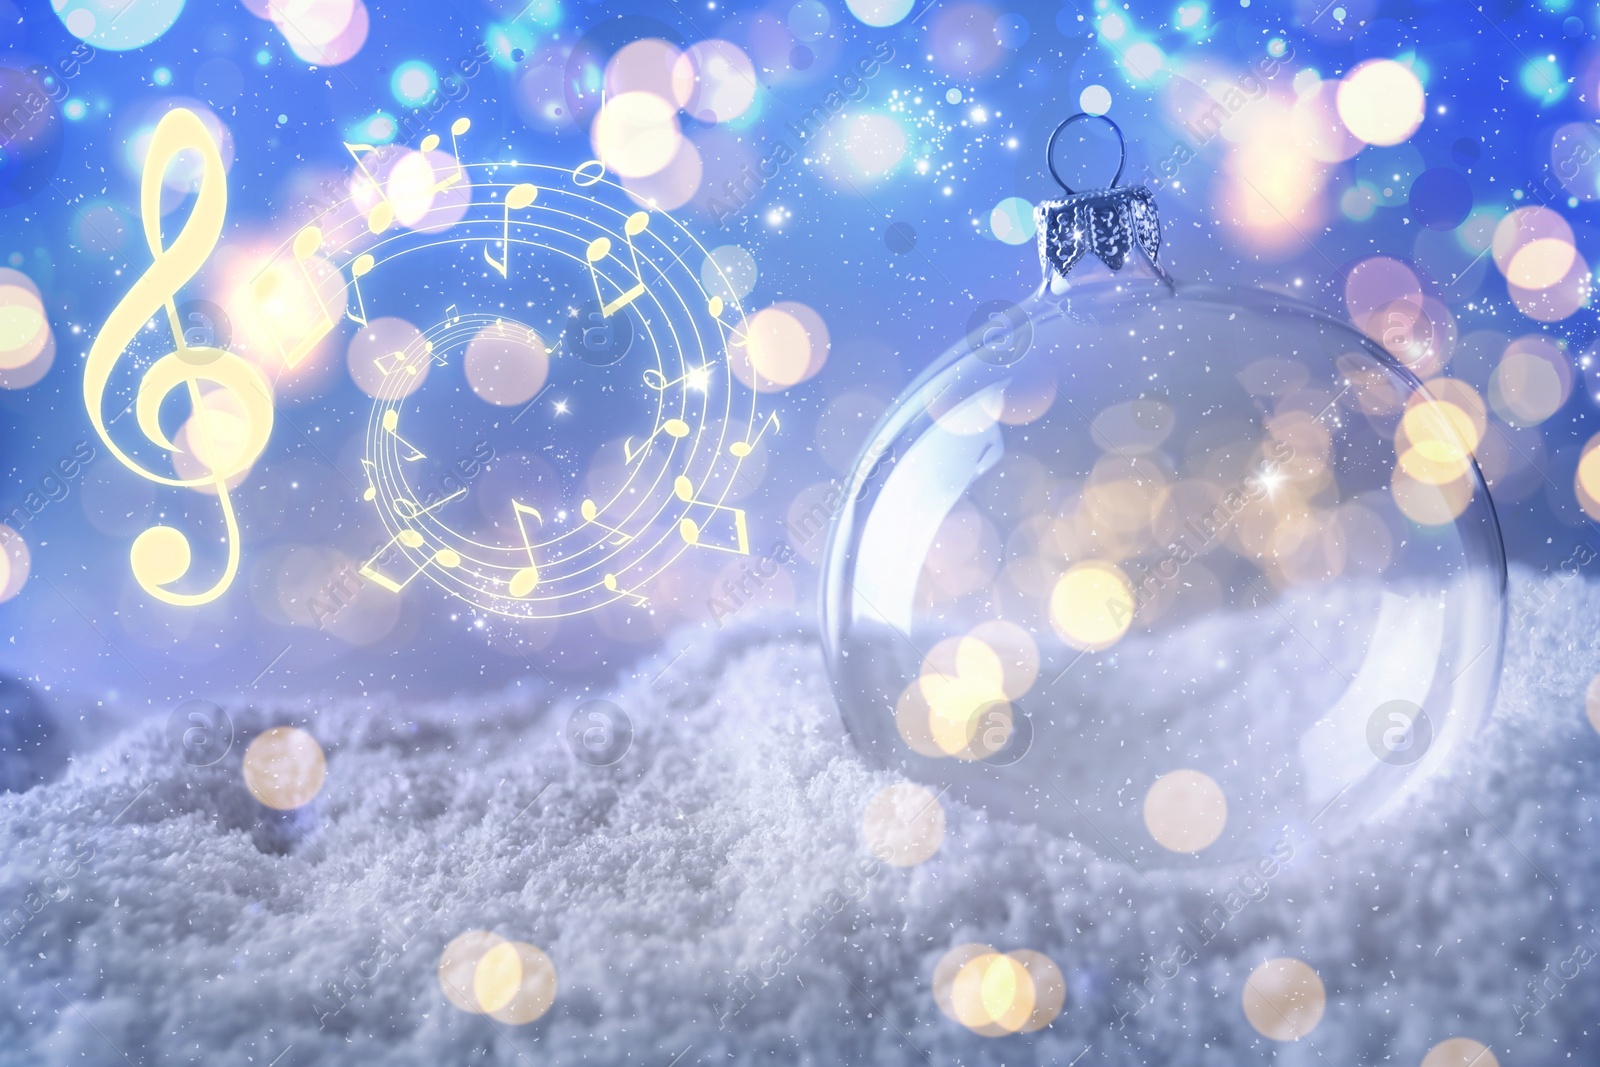 Image of Music notes and Christmas ball on snow, bokeh effect